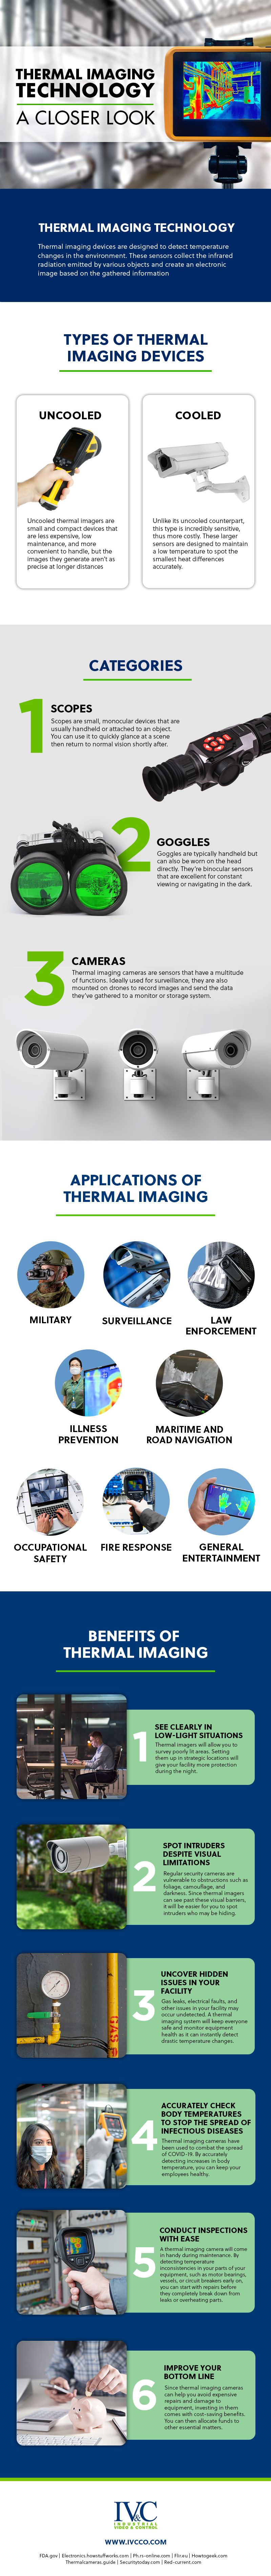 Infographic guide to thermal imaging